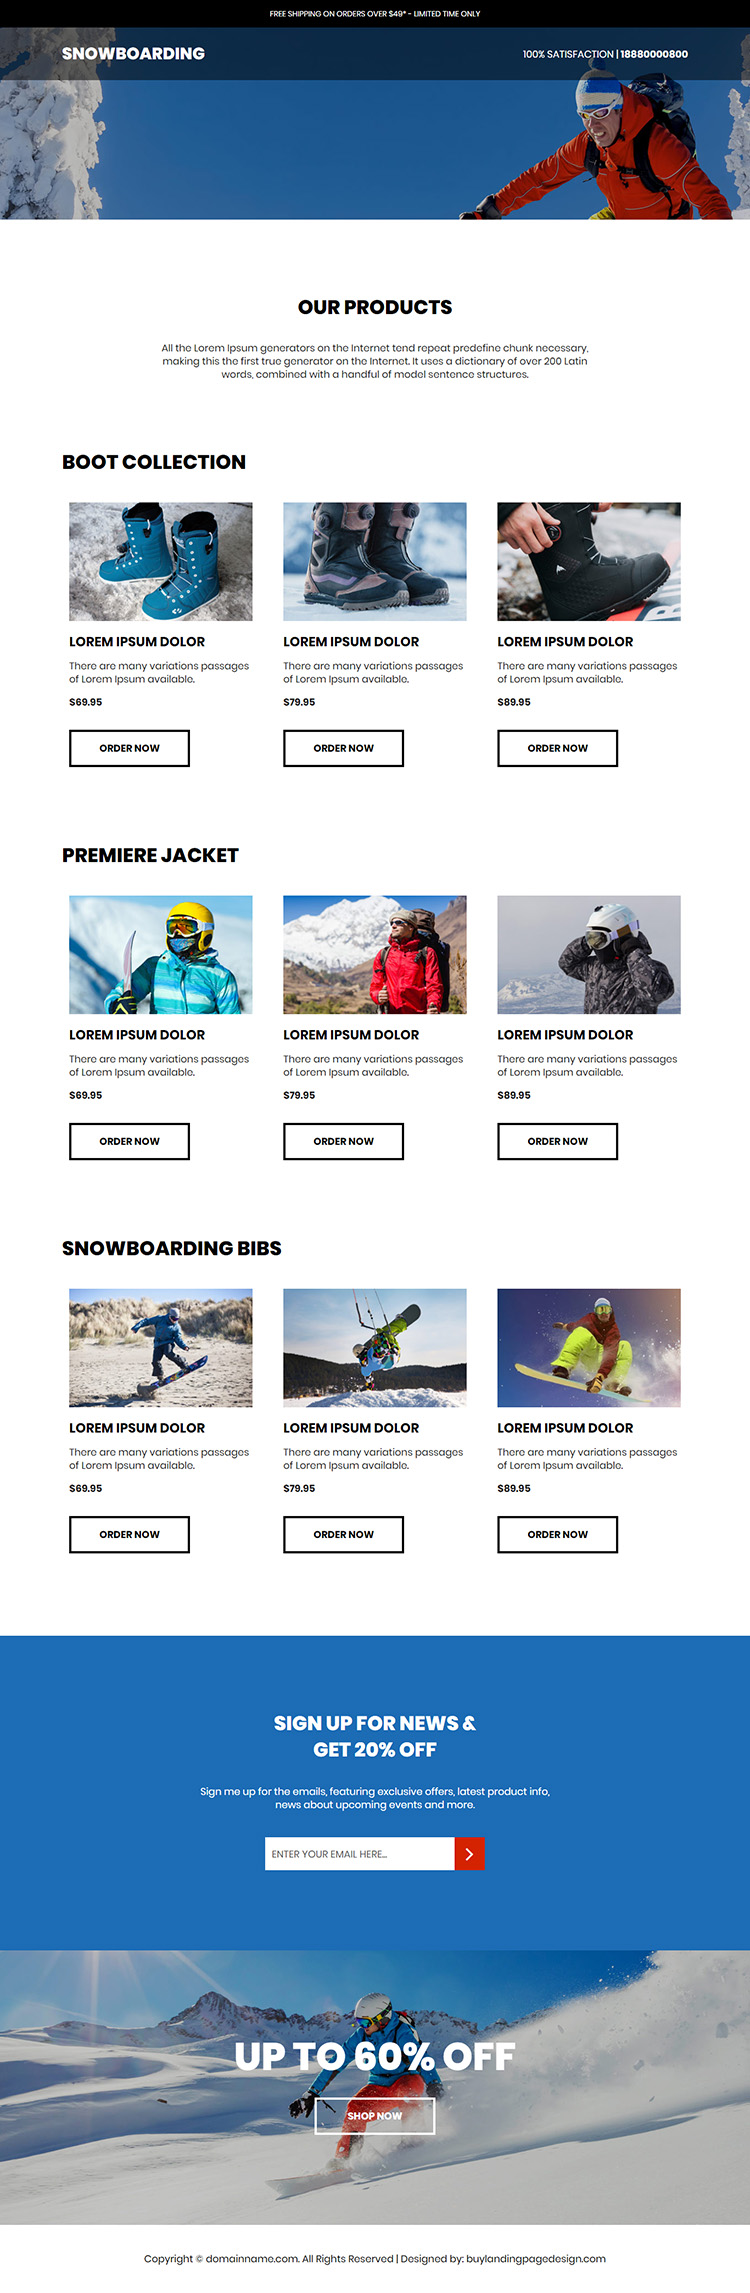 snowboarding products responsive ecommerce landing page design